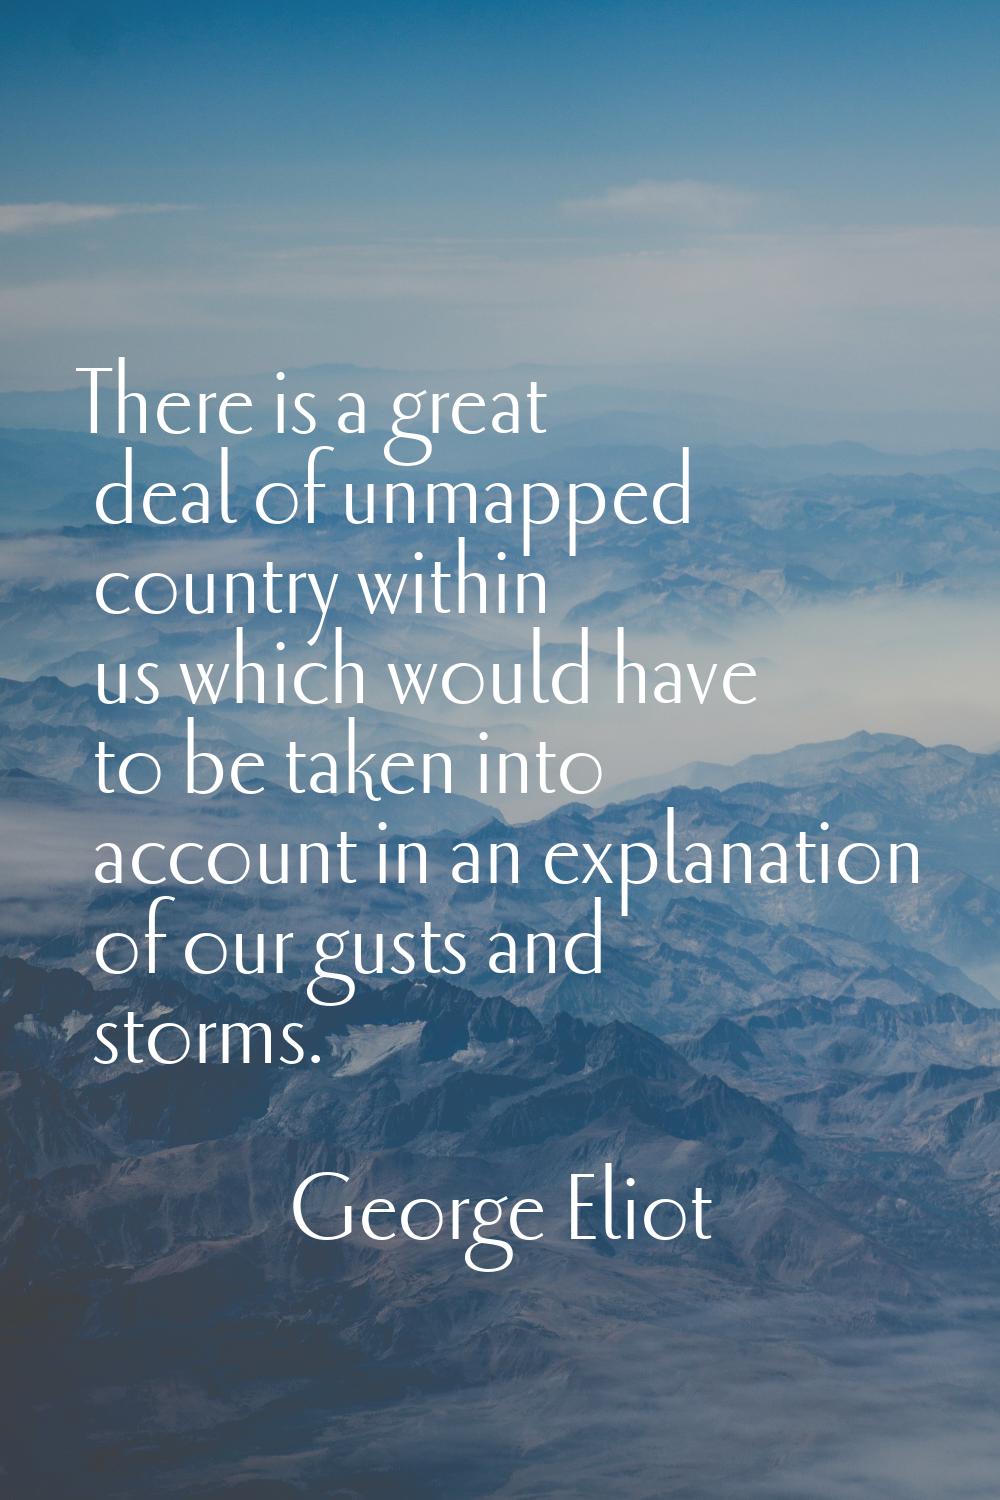 There is a great deal of unmapped country within us which would have to be taken into account in an